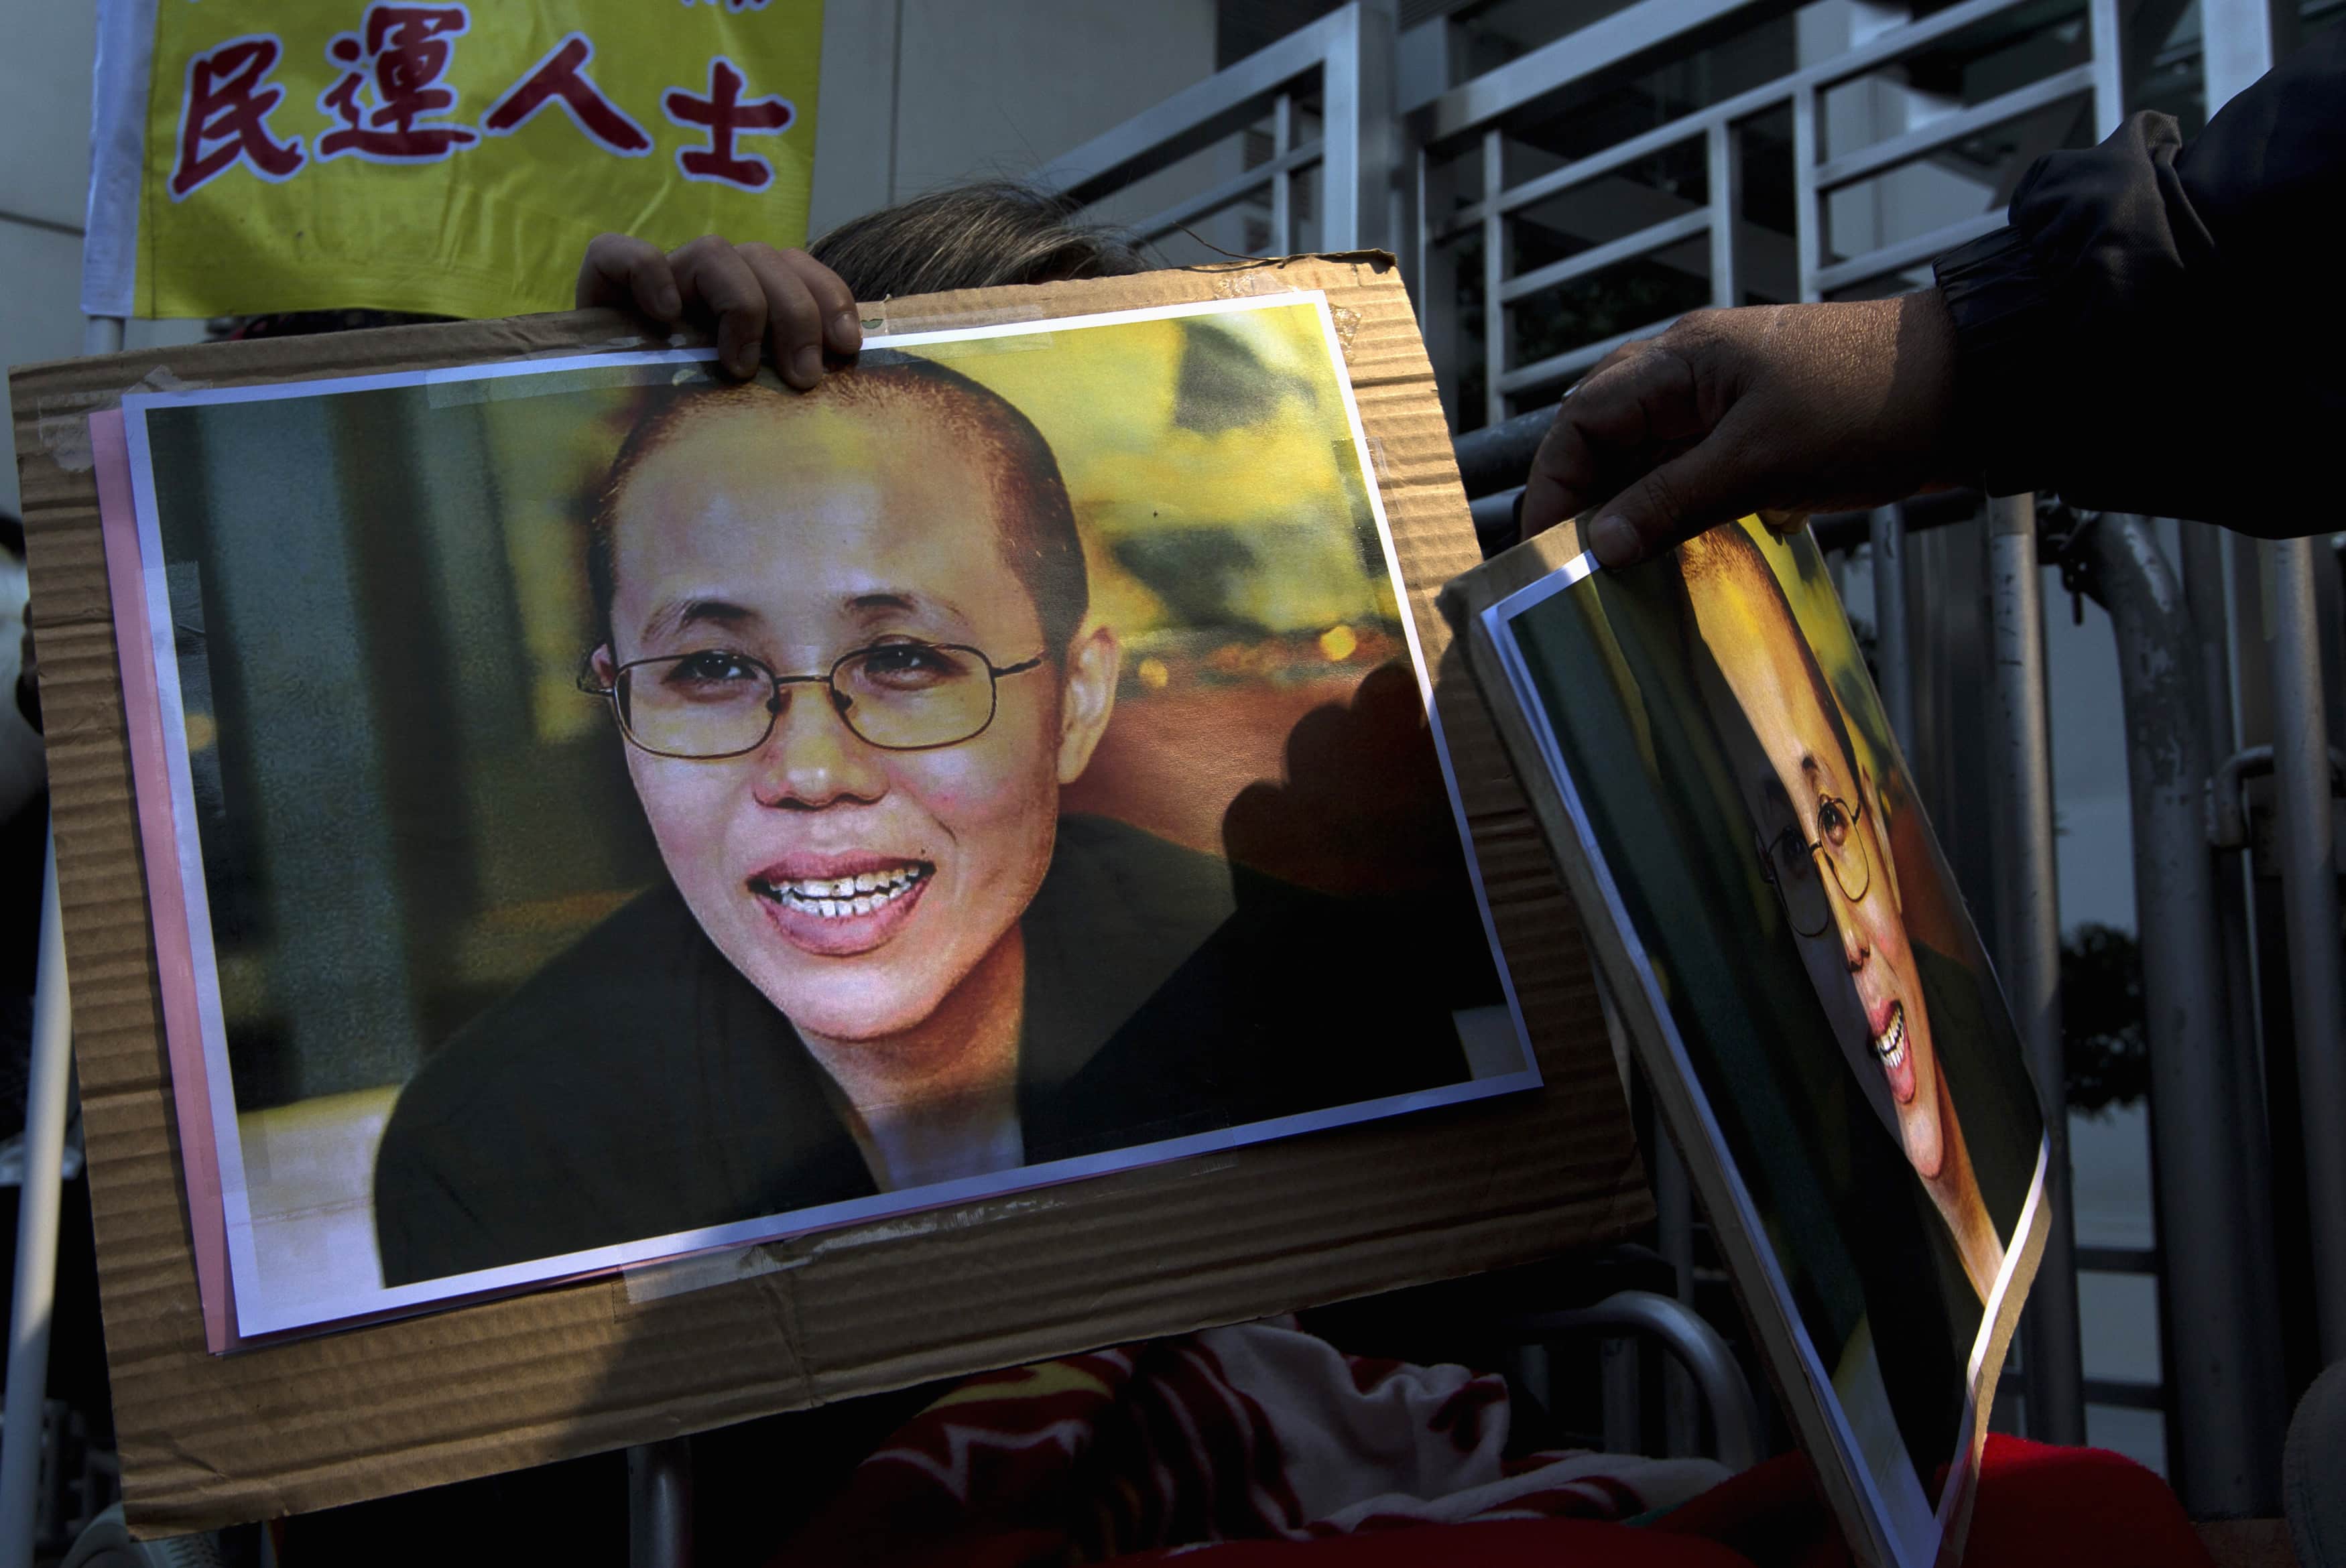 A portrait of Liu Xia is displayed during a protest calling for the release of Chinese dissidents outside the Chinese liaison office in Hong Kong, 5 December 2013, REUTERS/Tyrone Siu